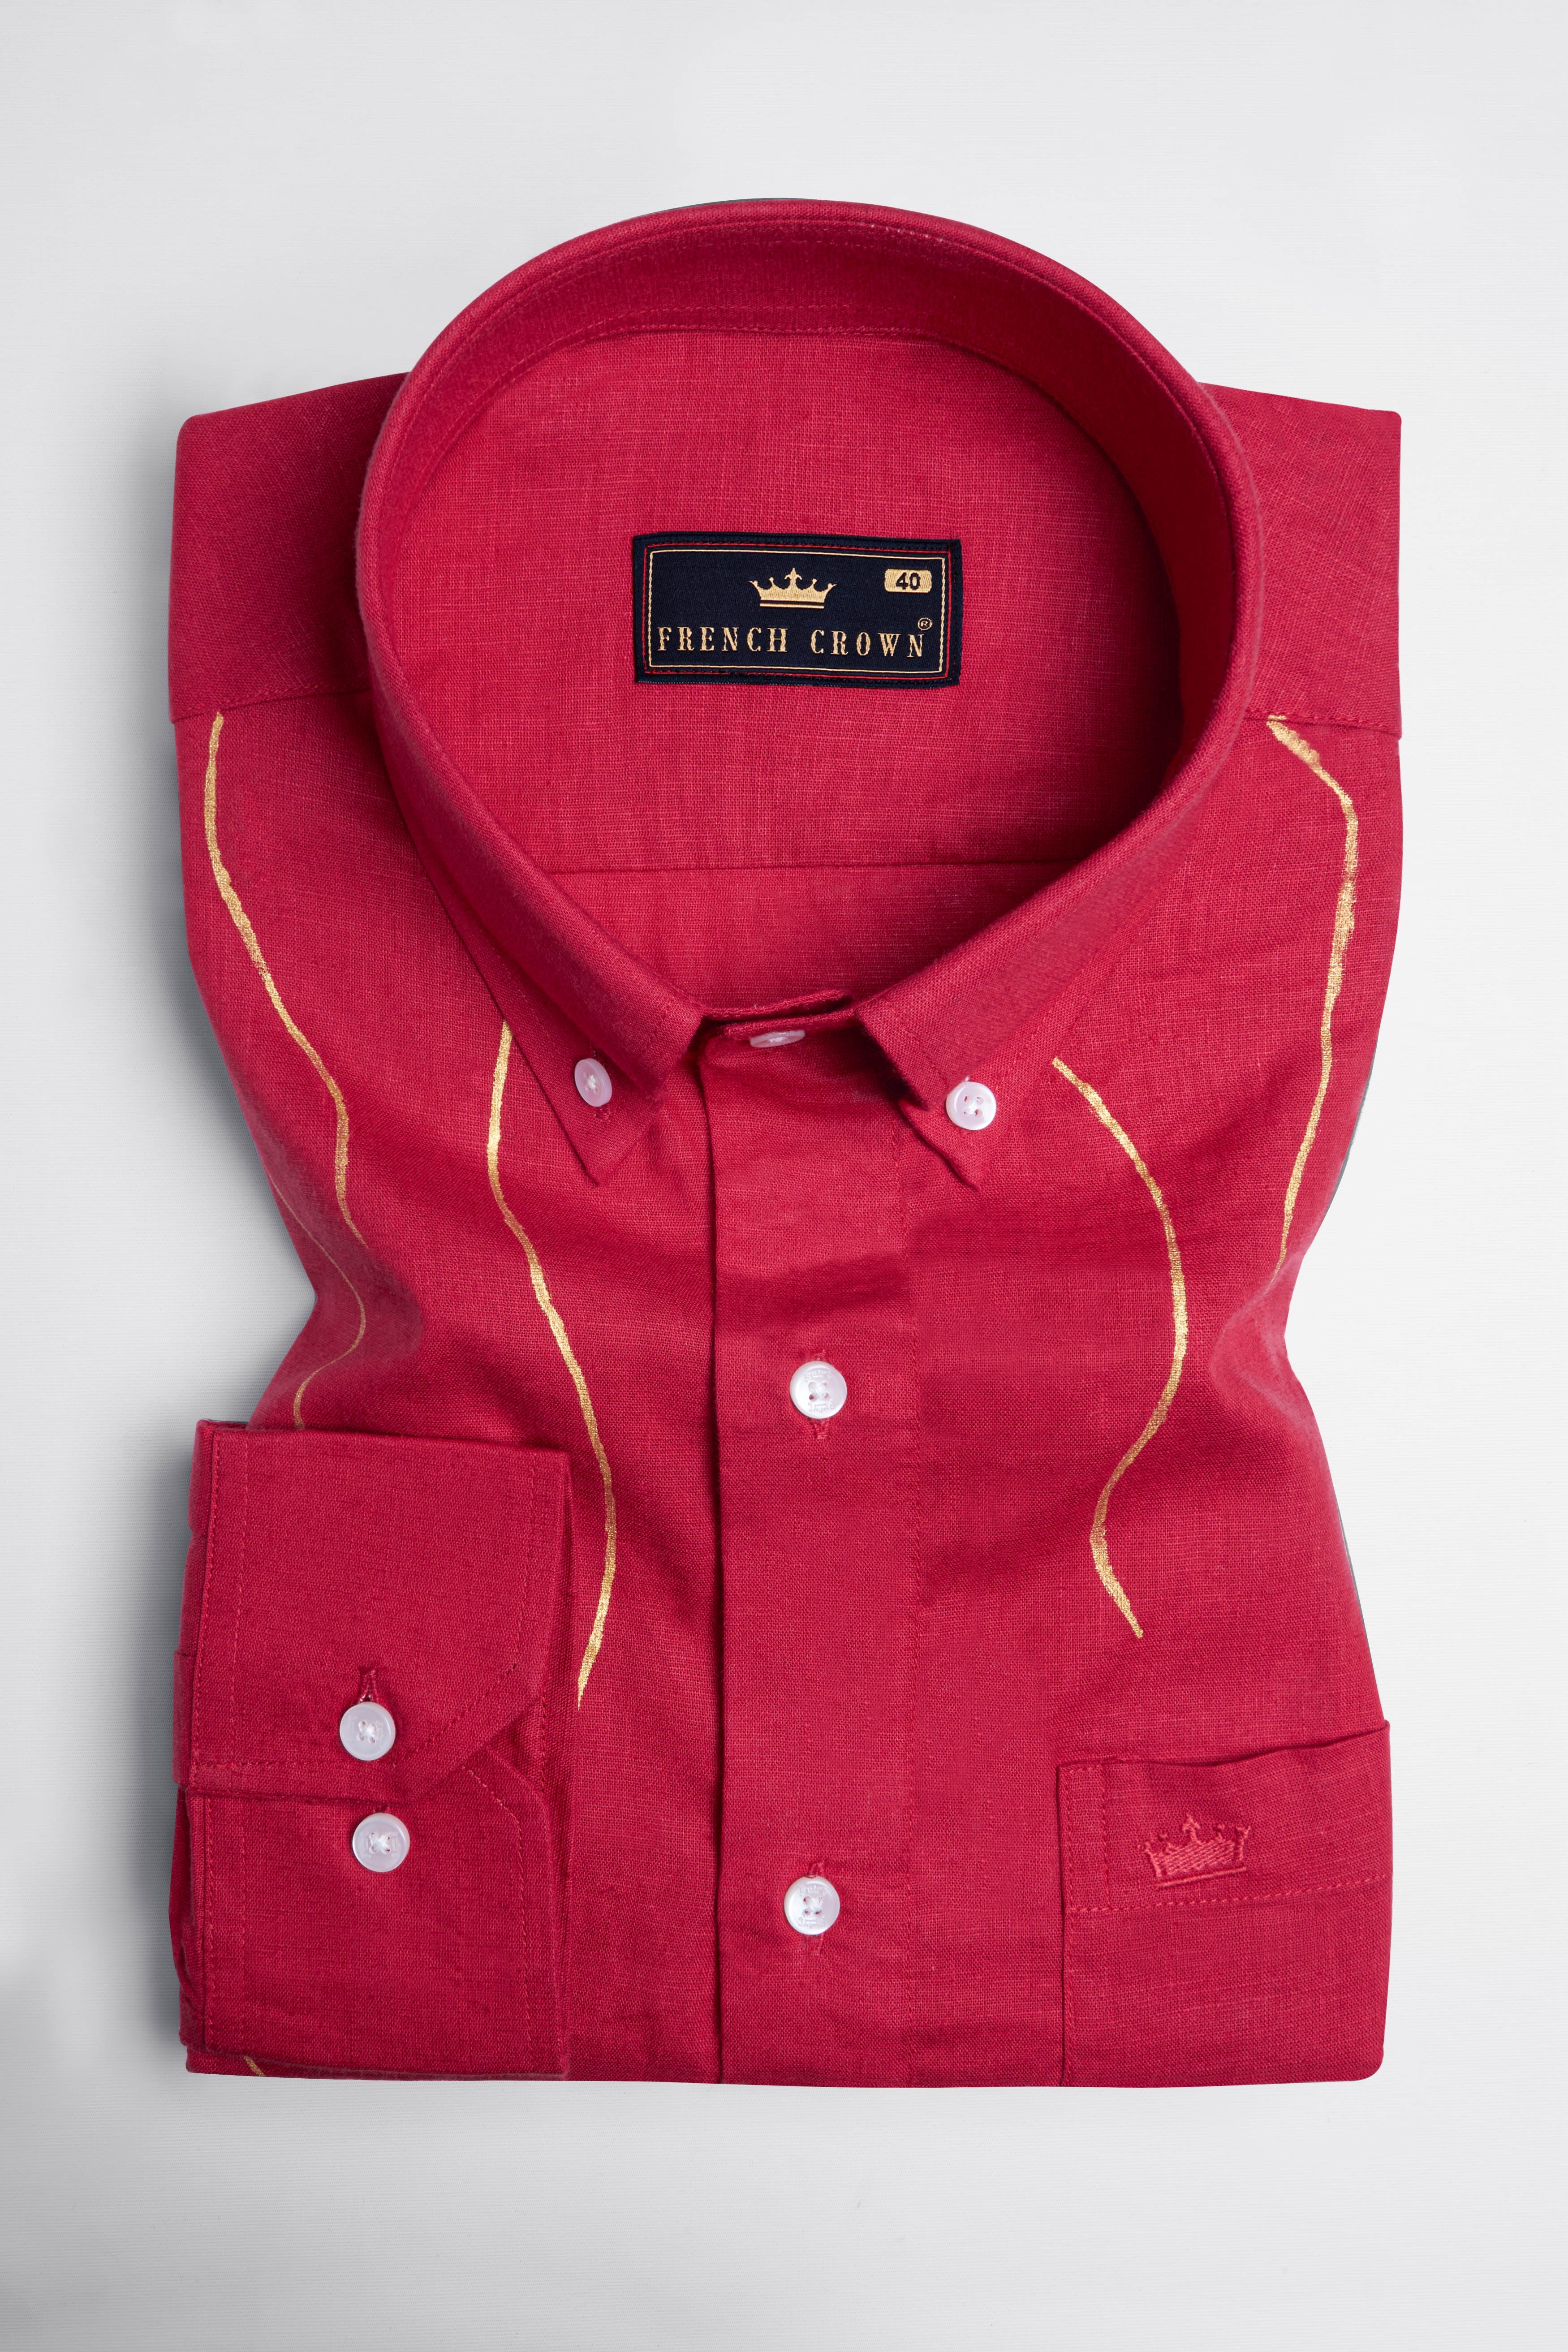 Carmine Red with Gold Hand Painted Luxurious Linen Designer Shirt